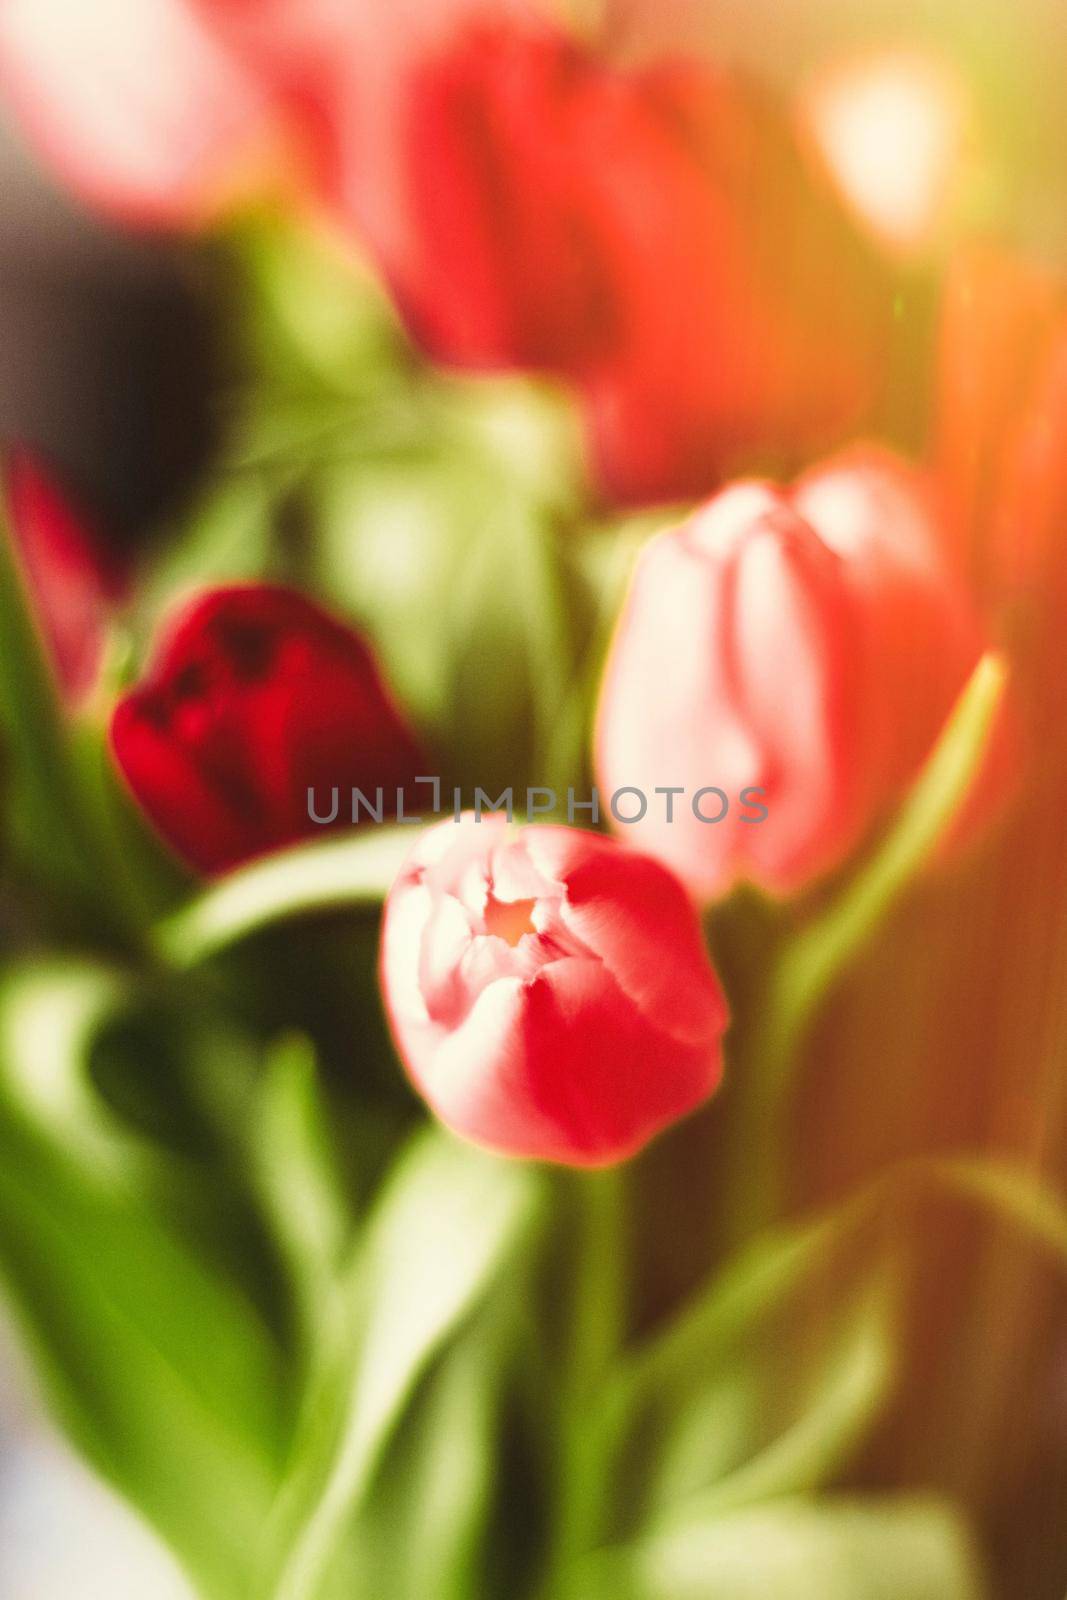 Bouquet of tulips in bloom - mothers day, springtime and international womens day concept. Brighten up your home with flowers